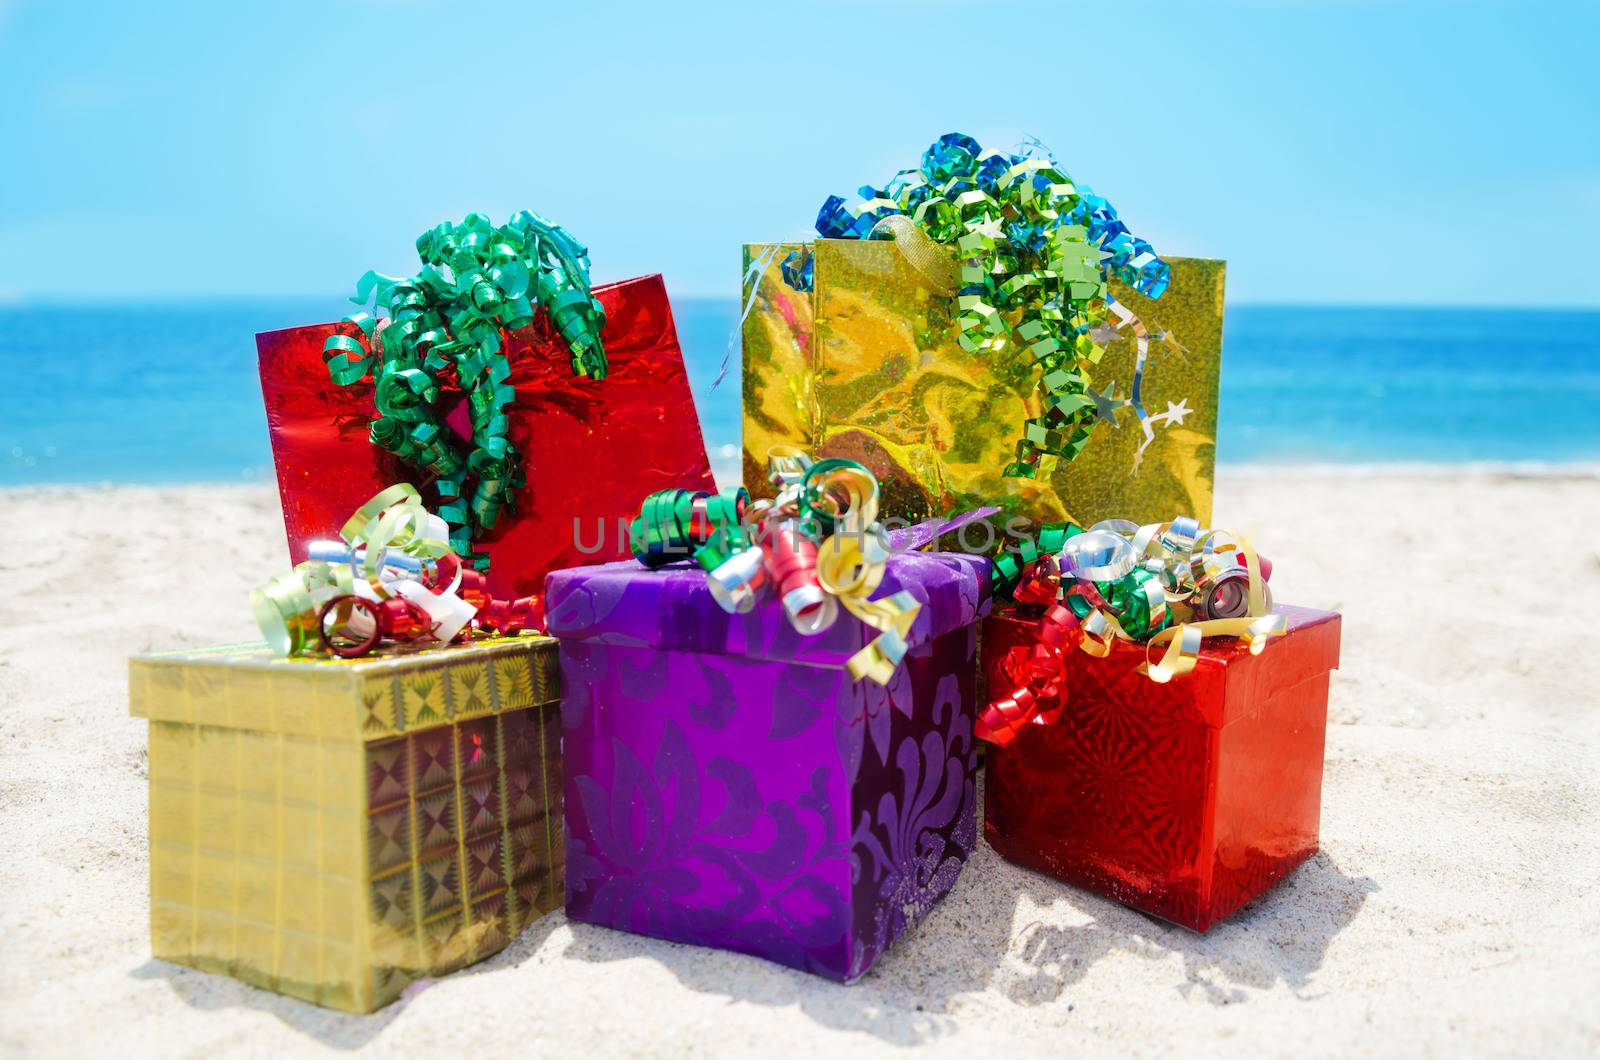 Three gift boxes and two gift bags on sandy beach in sunny day- holiday concept